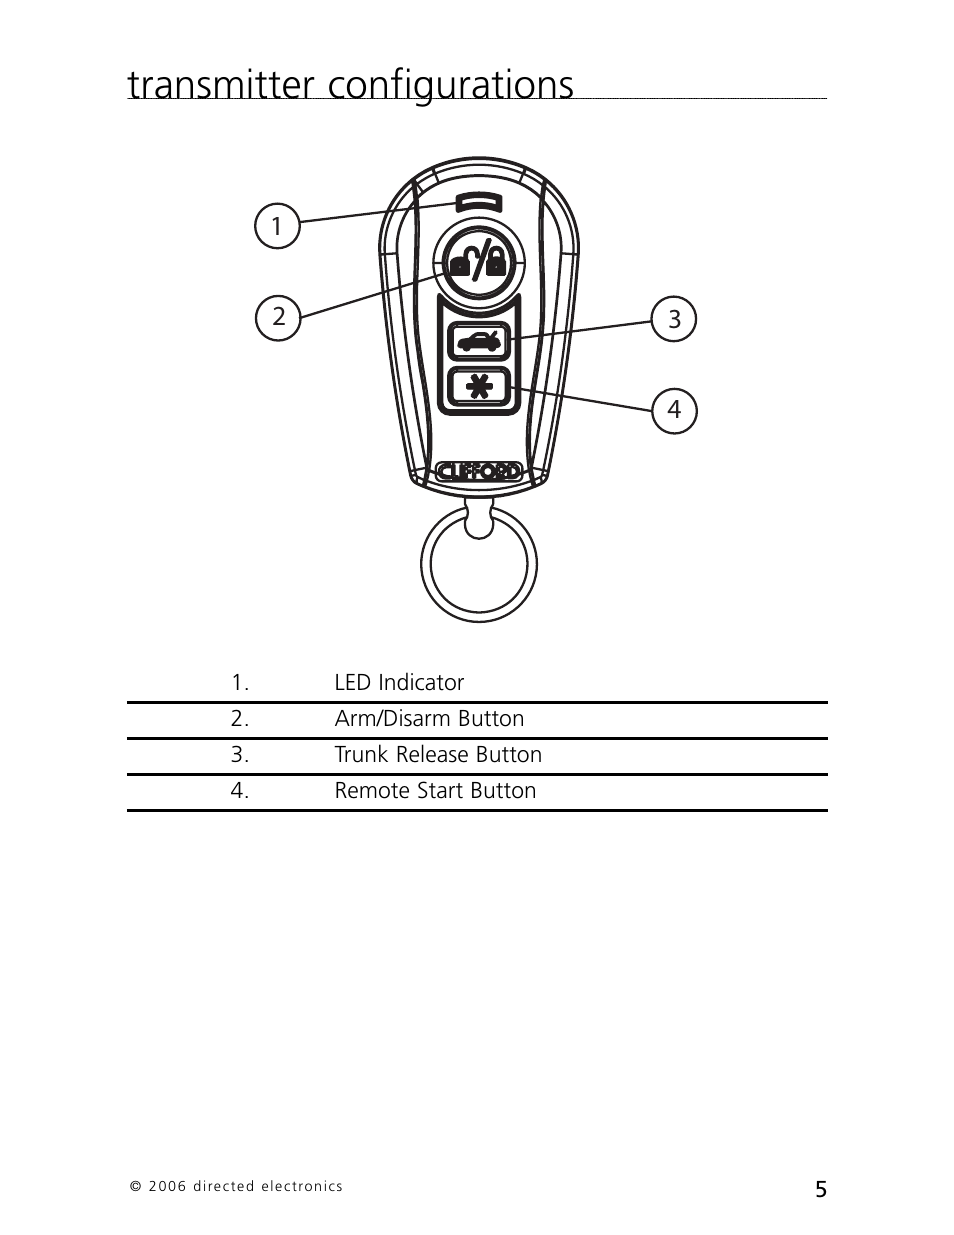 Transmitter configurations | CLIFFORD Arrow 5.1 User Manual | Page 8 / 38